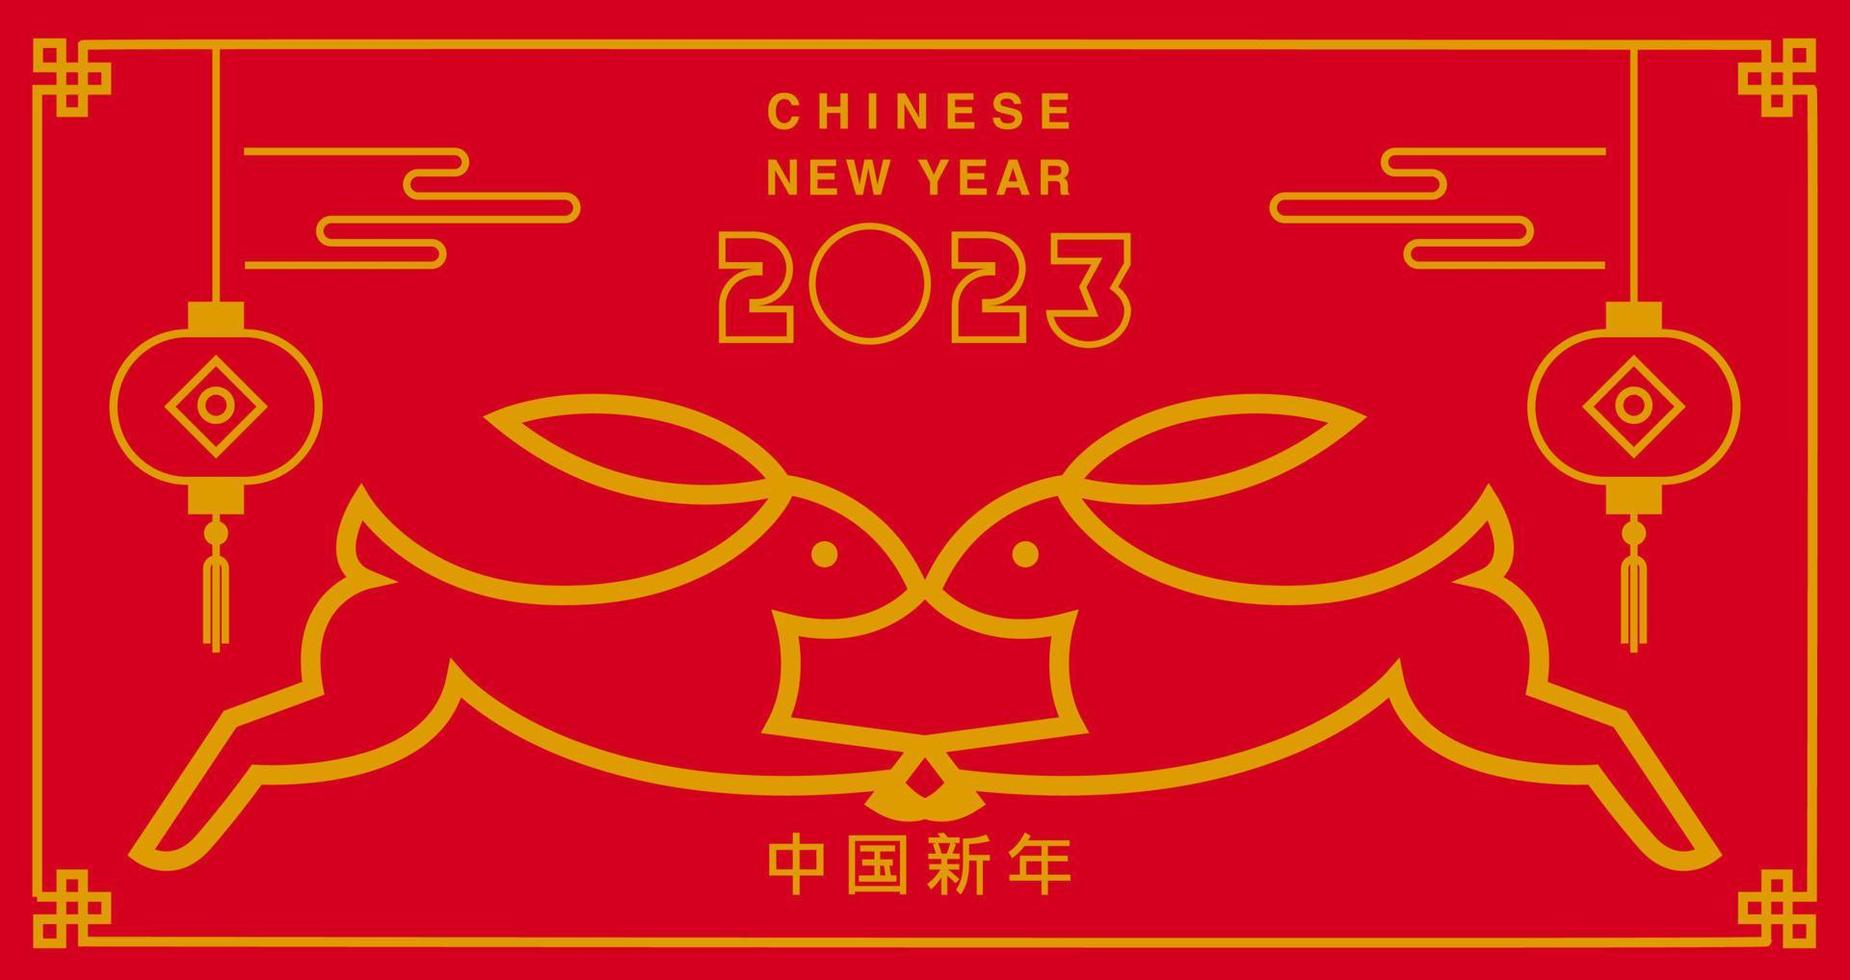 Lunar new year, Chinese New Year 2023 , Year of the Rabbit , reflection vector